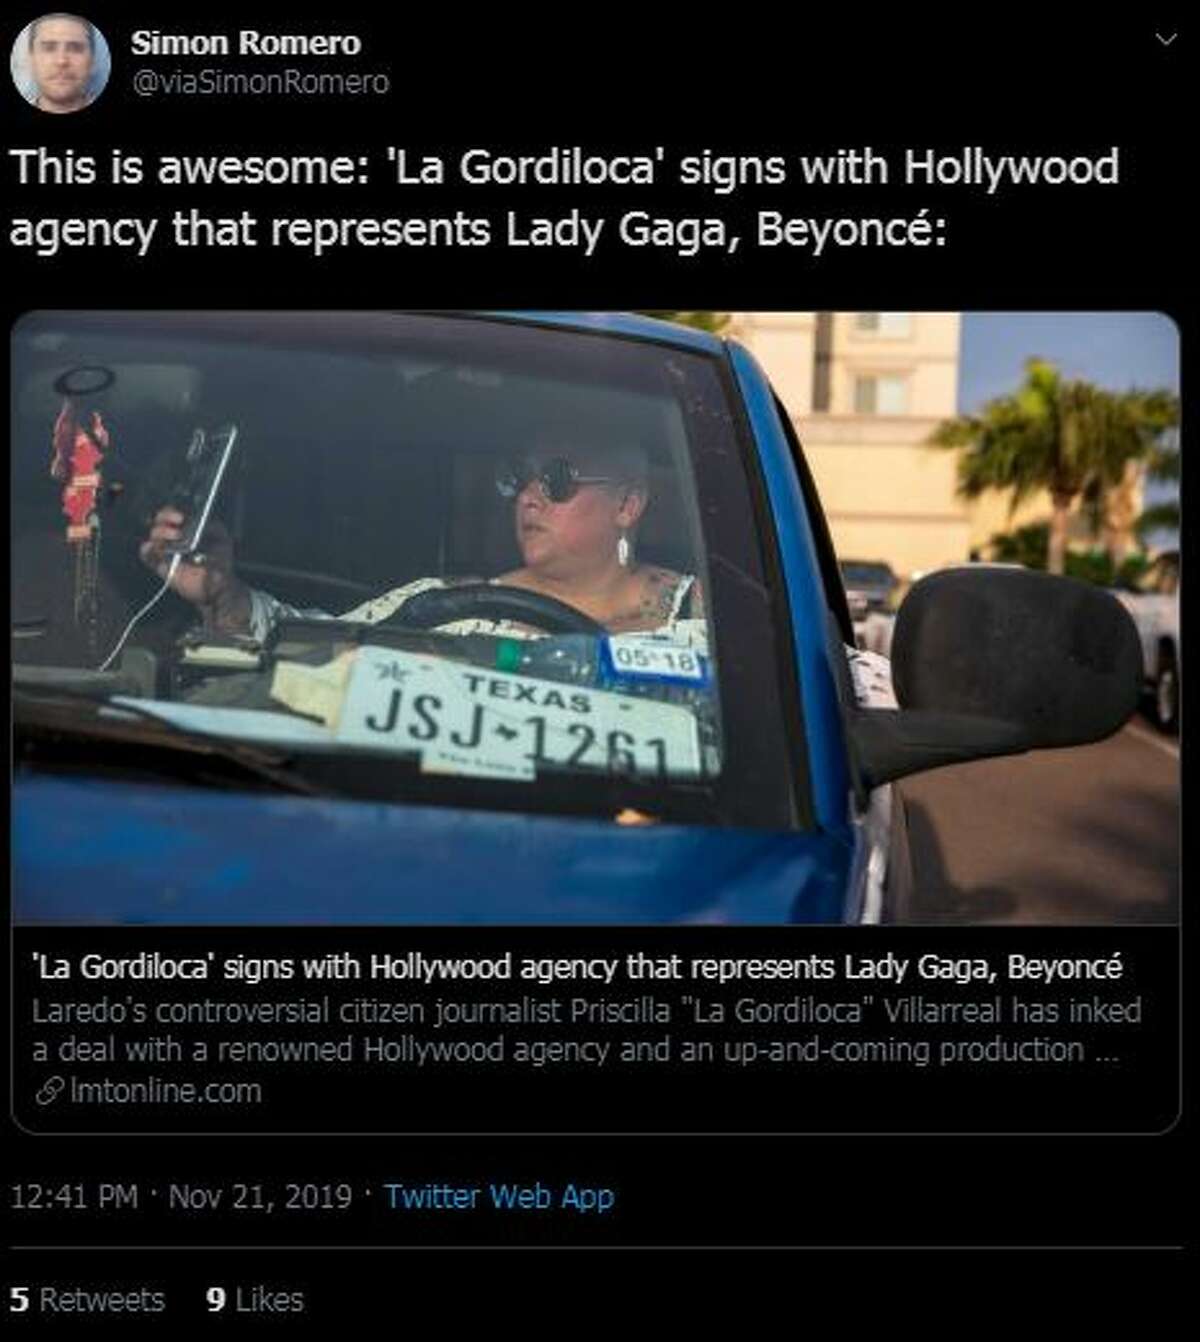 News of 'La Gordiloca' signing with a Hollywood talent agency spread around Laredo, with locals reacting to news with both celebration and derision.